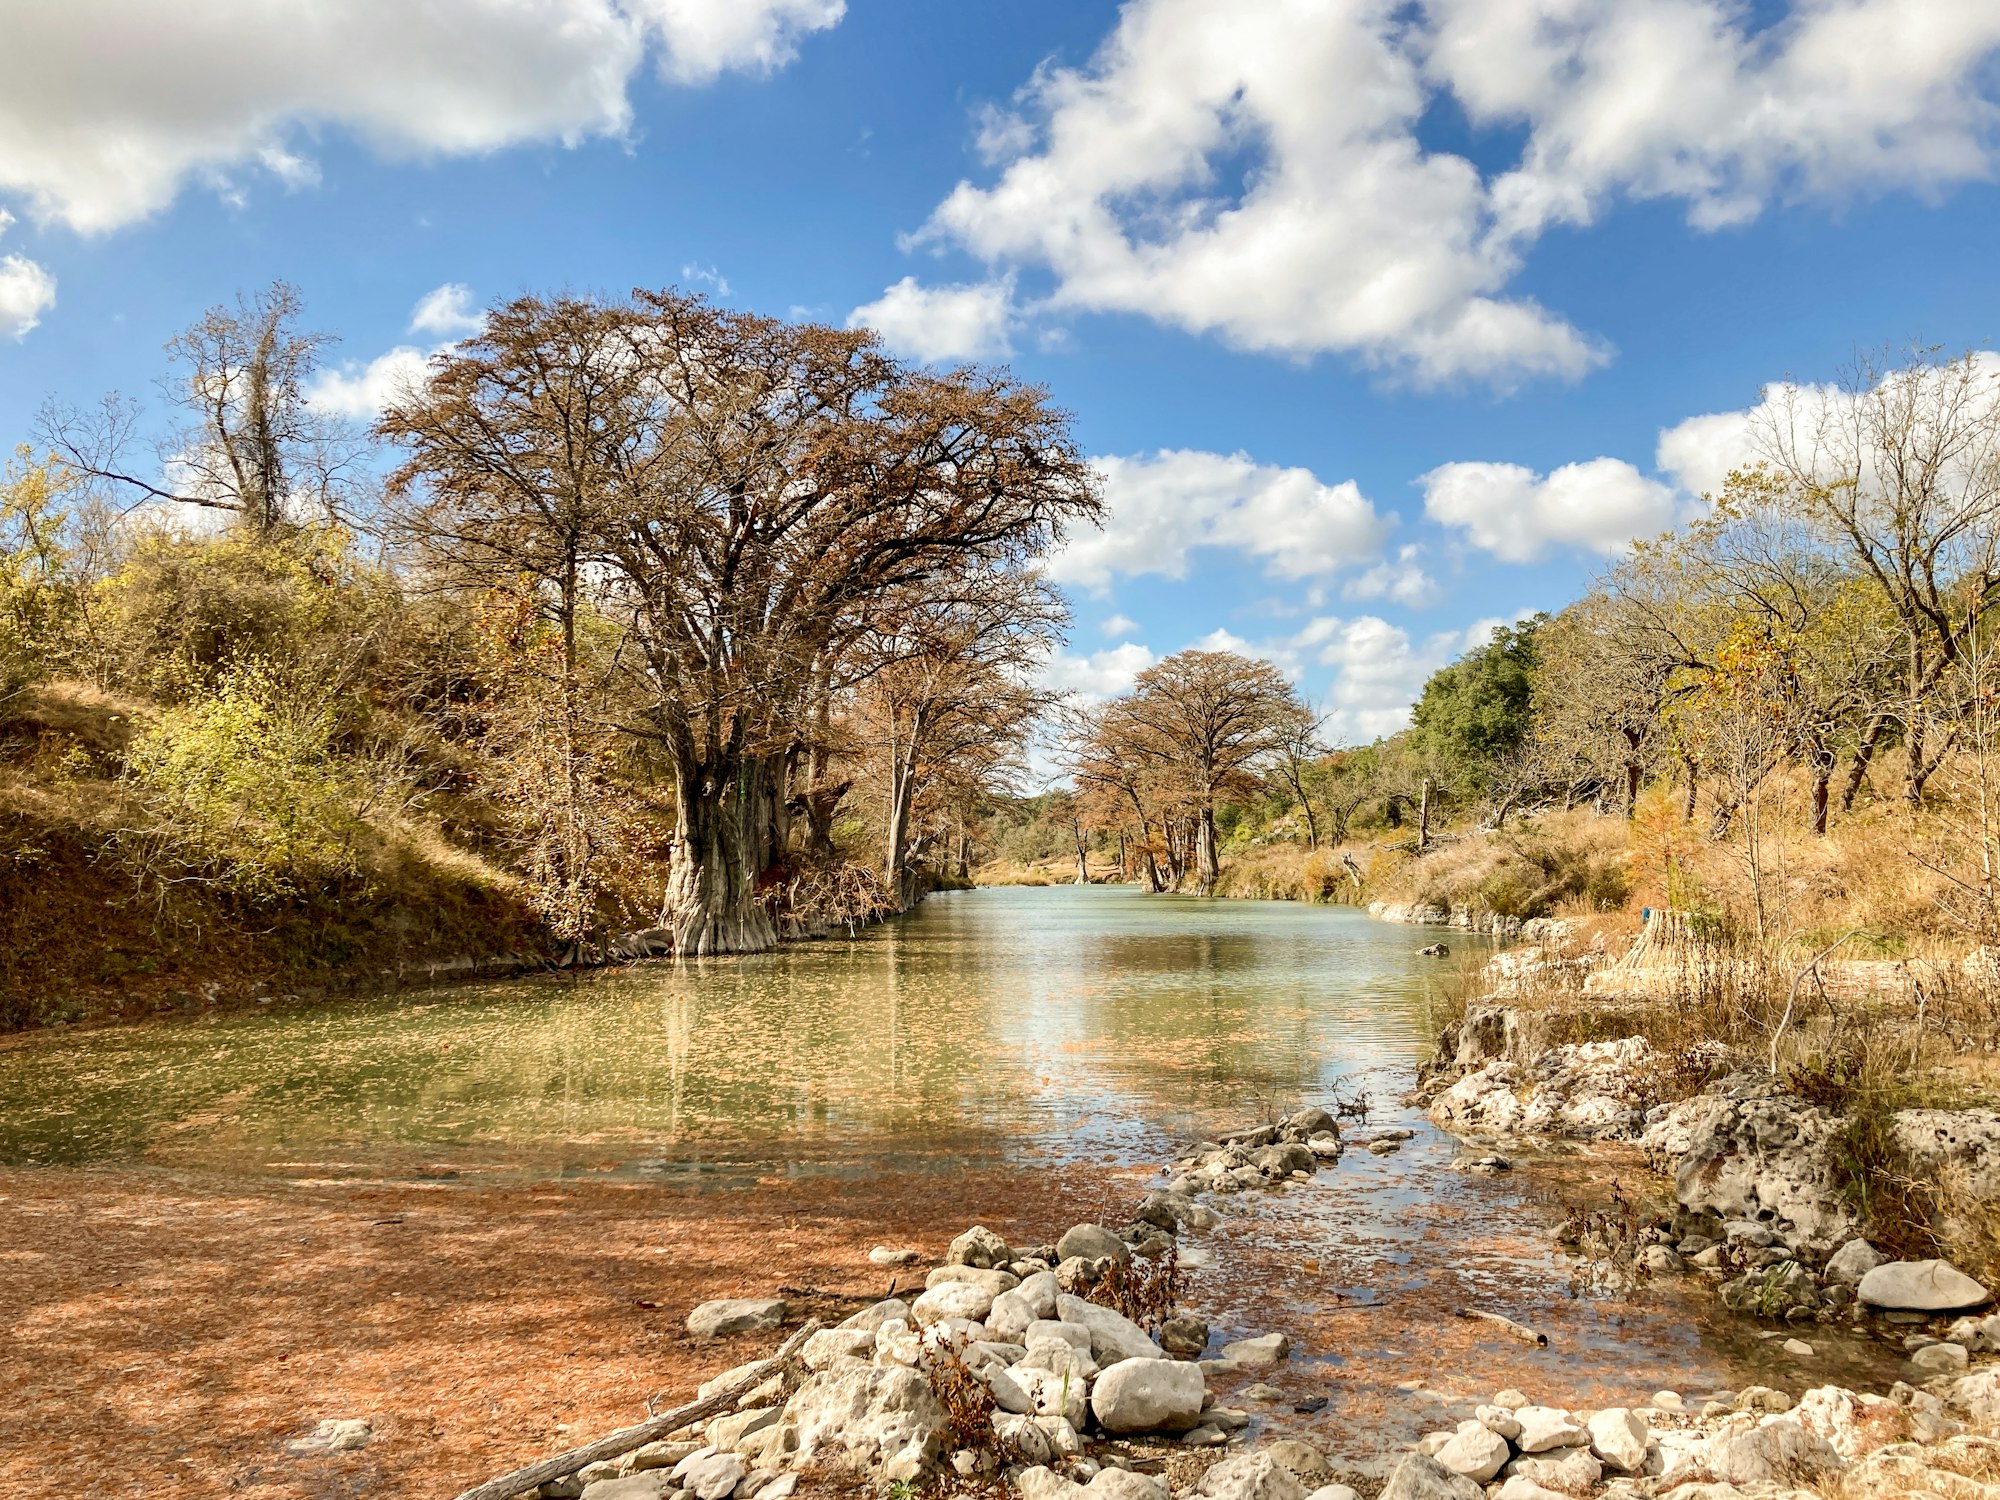 How to Plan a Killer Guadalupe River Camping and Tubing Trip